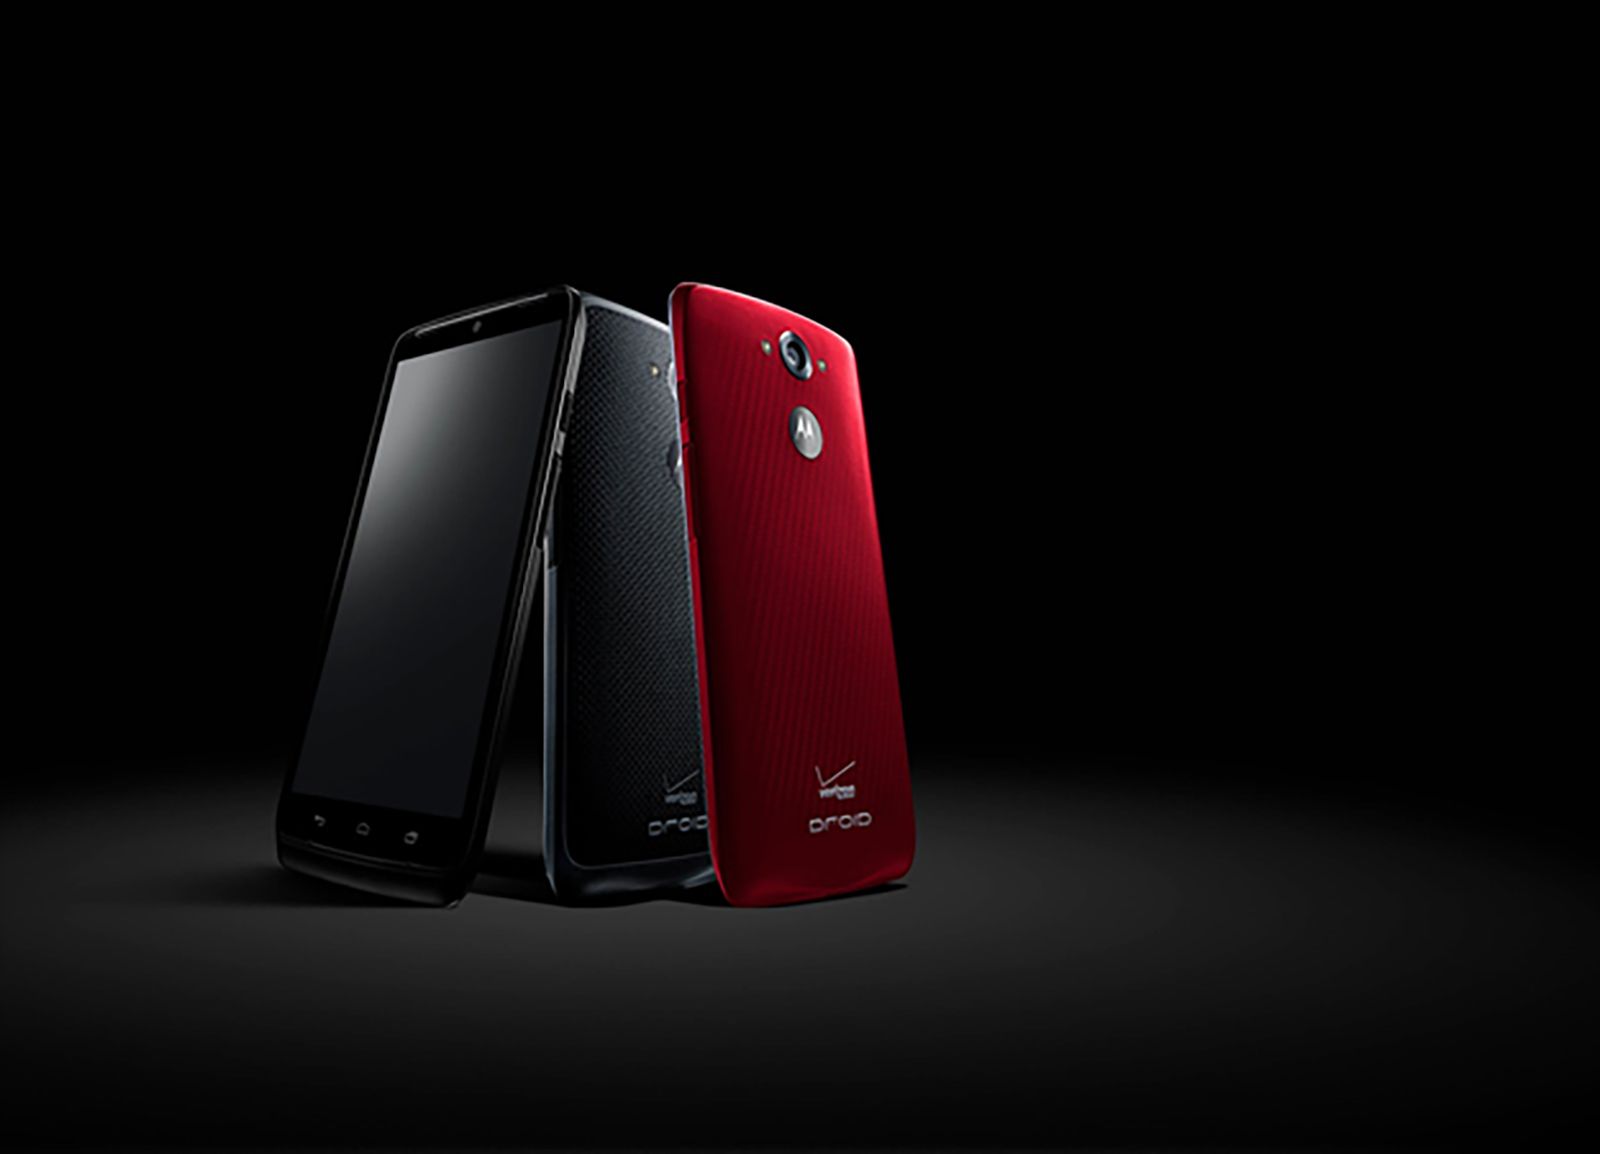 verizon s powerful droid turbo has a 5 2 inch quad hd screen and 48 hour battery image 1